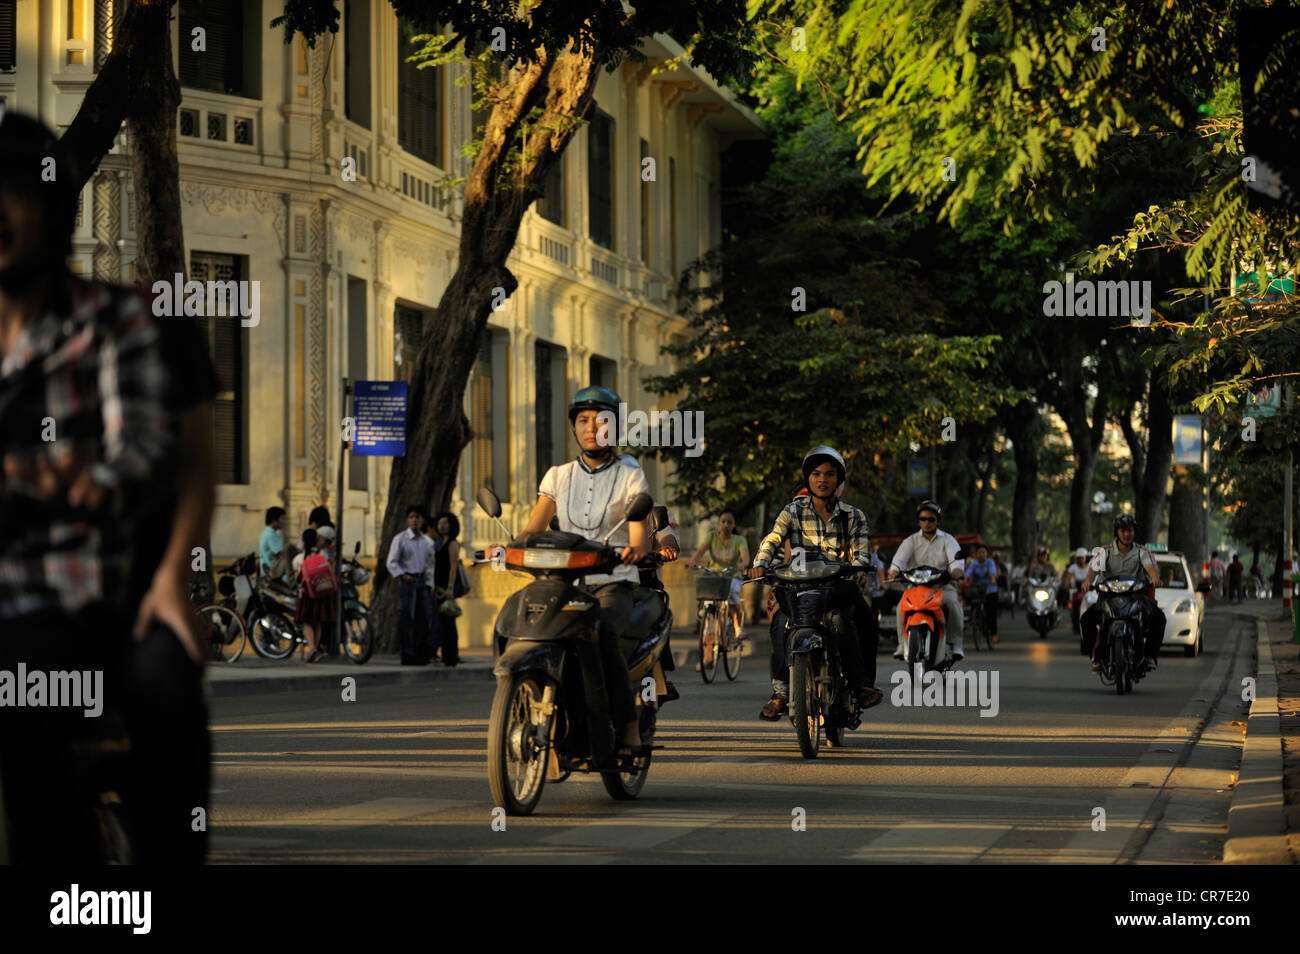 Vietnam, Hanoi, old town, traffic around Hoan Kiem Lake (also called the small lake or Lake of the Restored Sword) Stock Photo